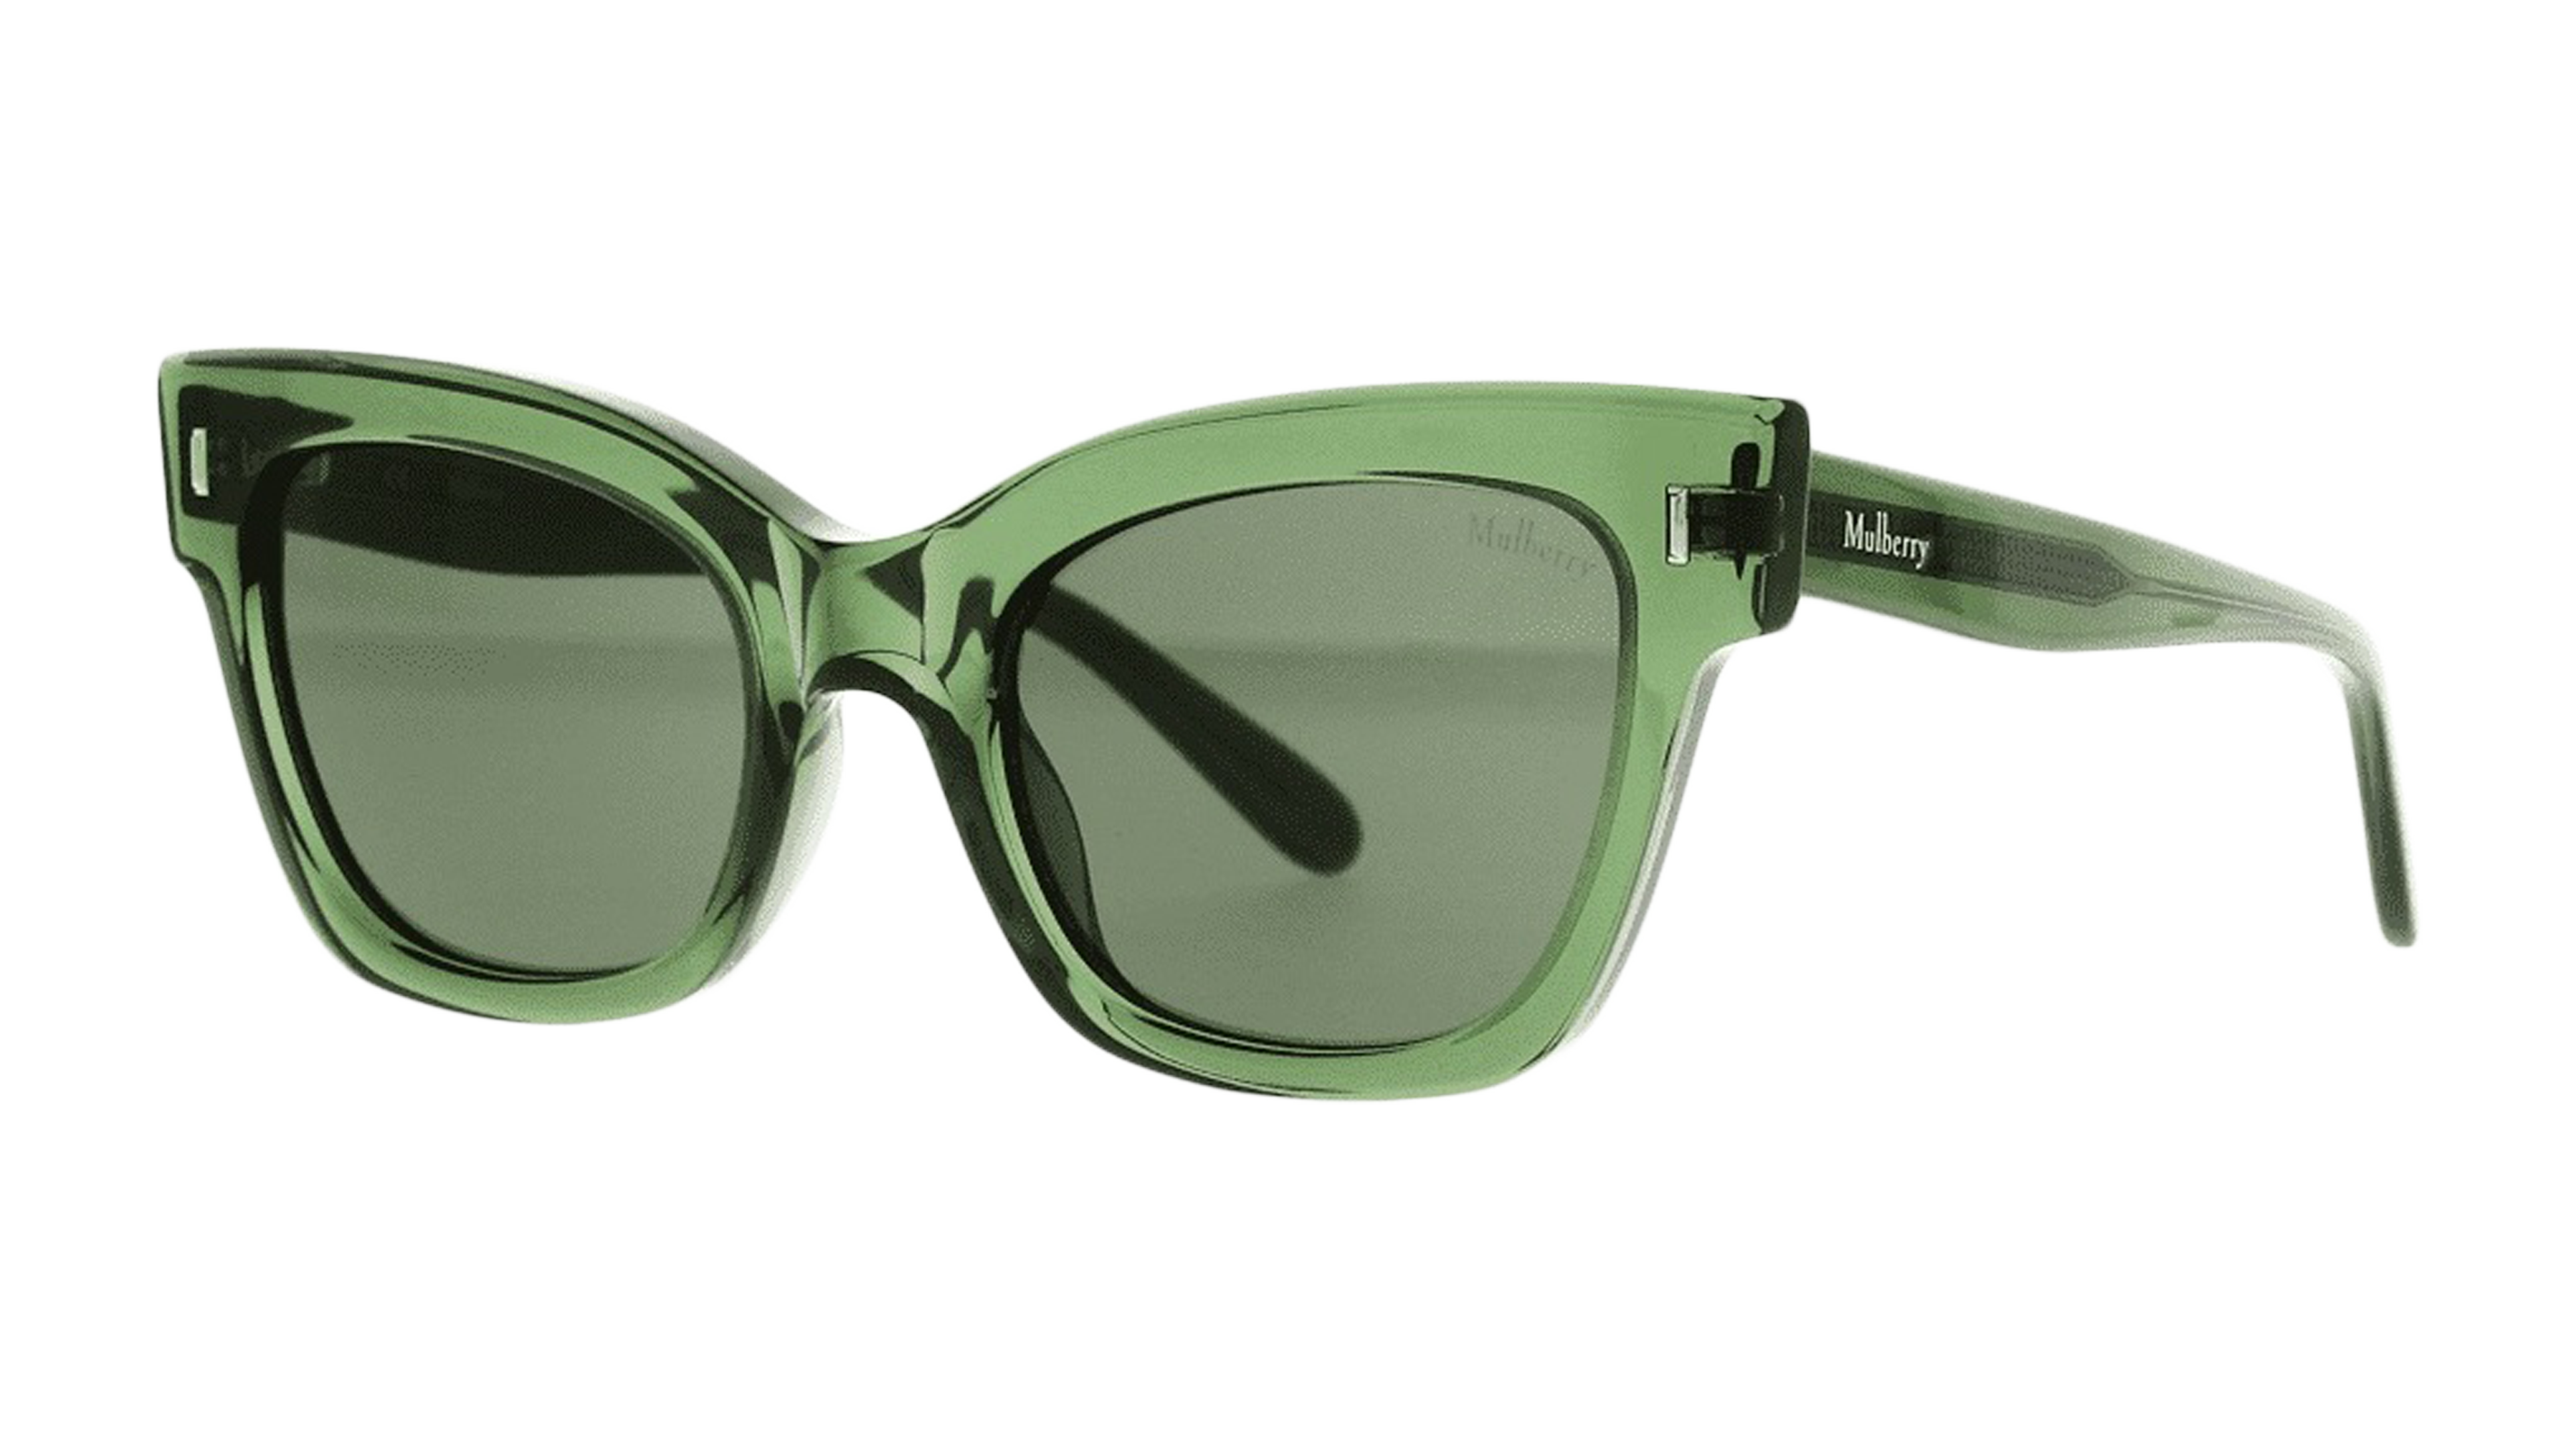 Angle_Left01 Mulberry SML 003 Sunglasses Green / Transparent, Green